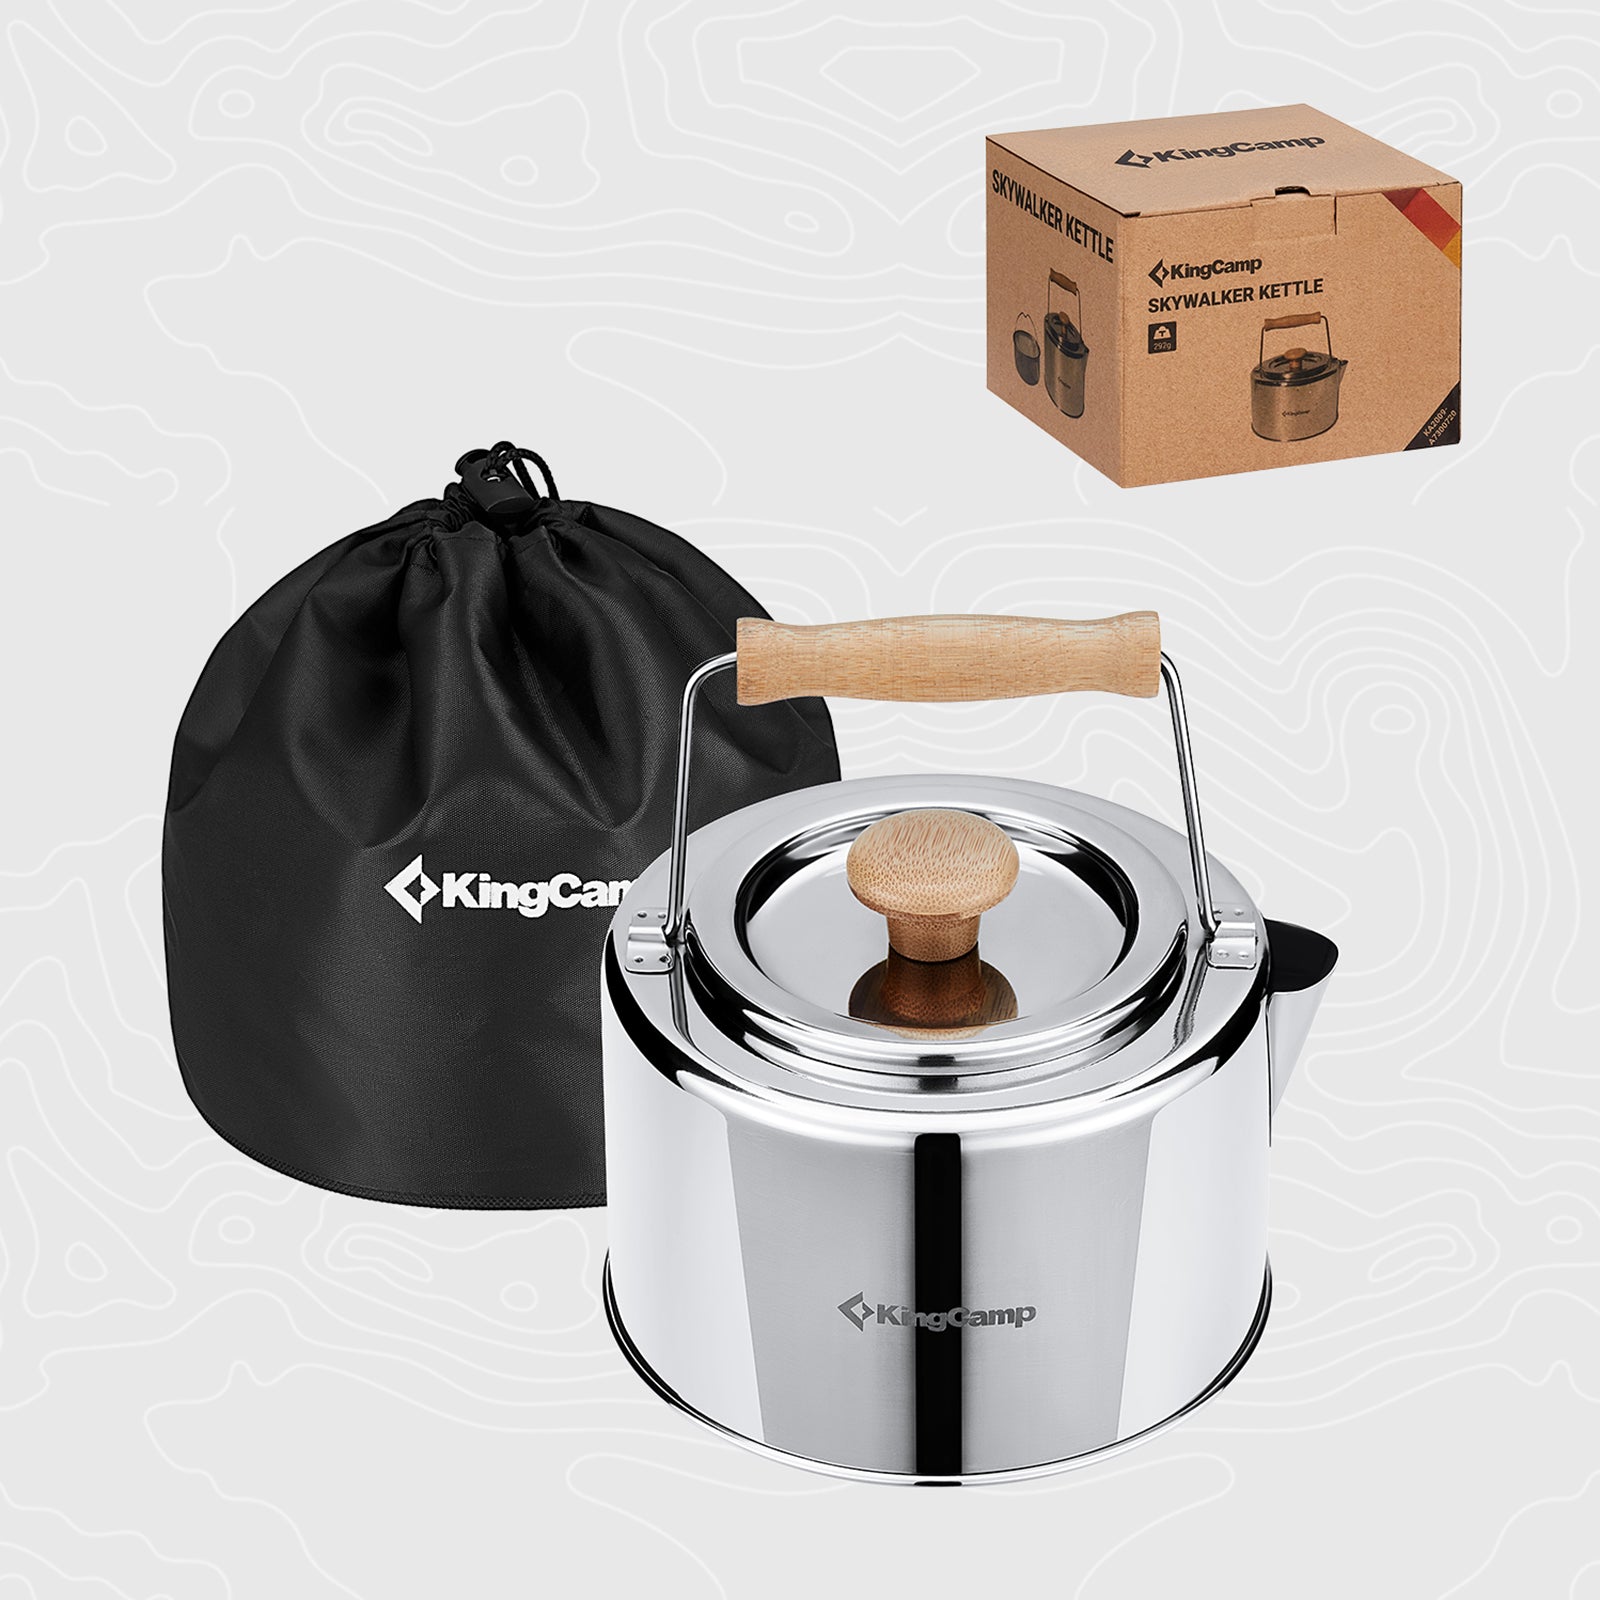 KingCamp 1.2L Stainless Steel Camping Kettle